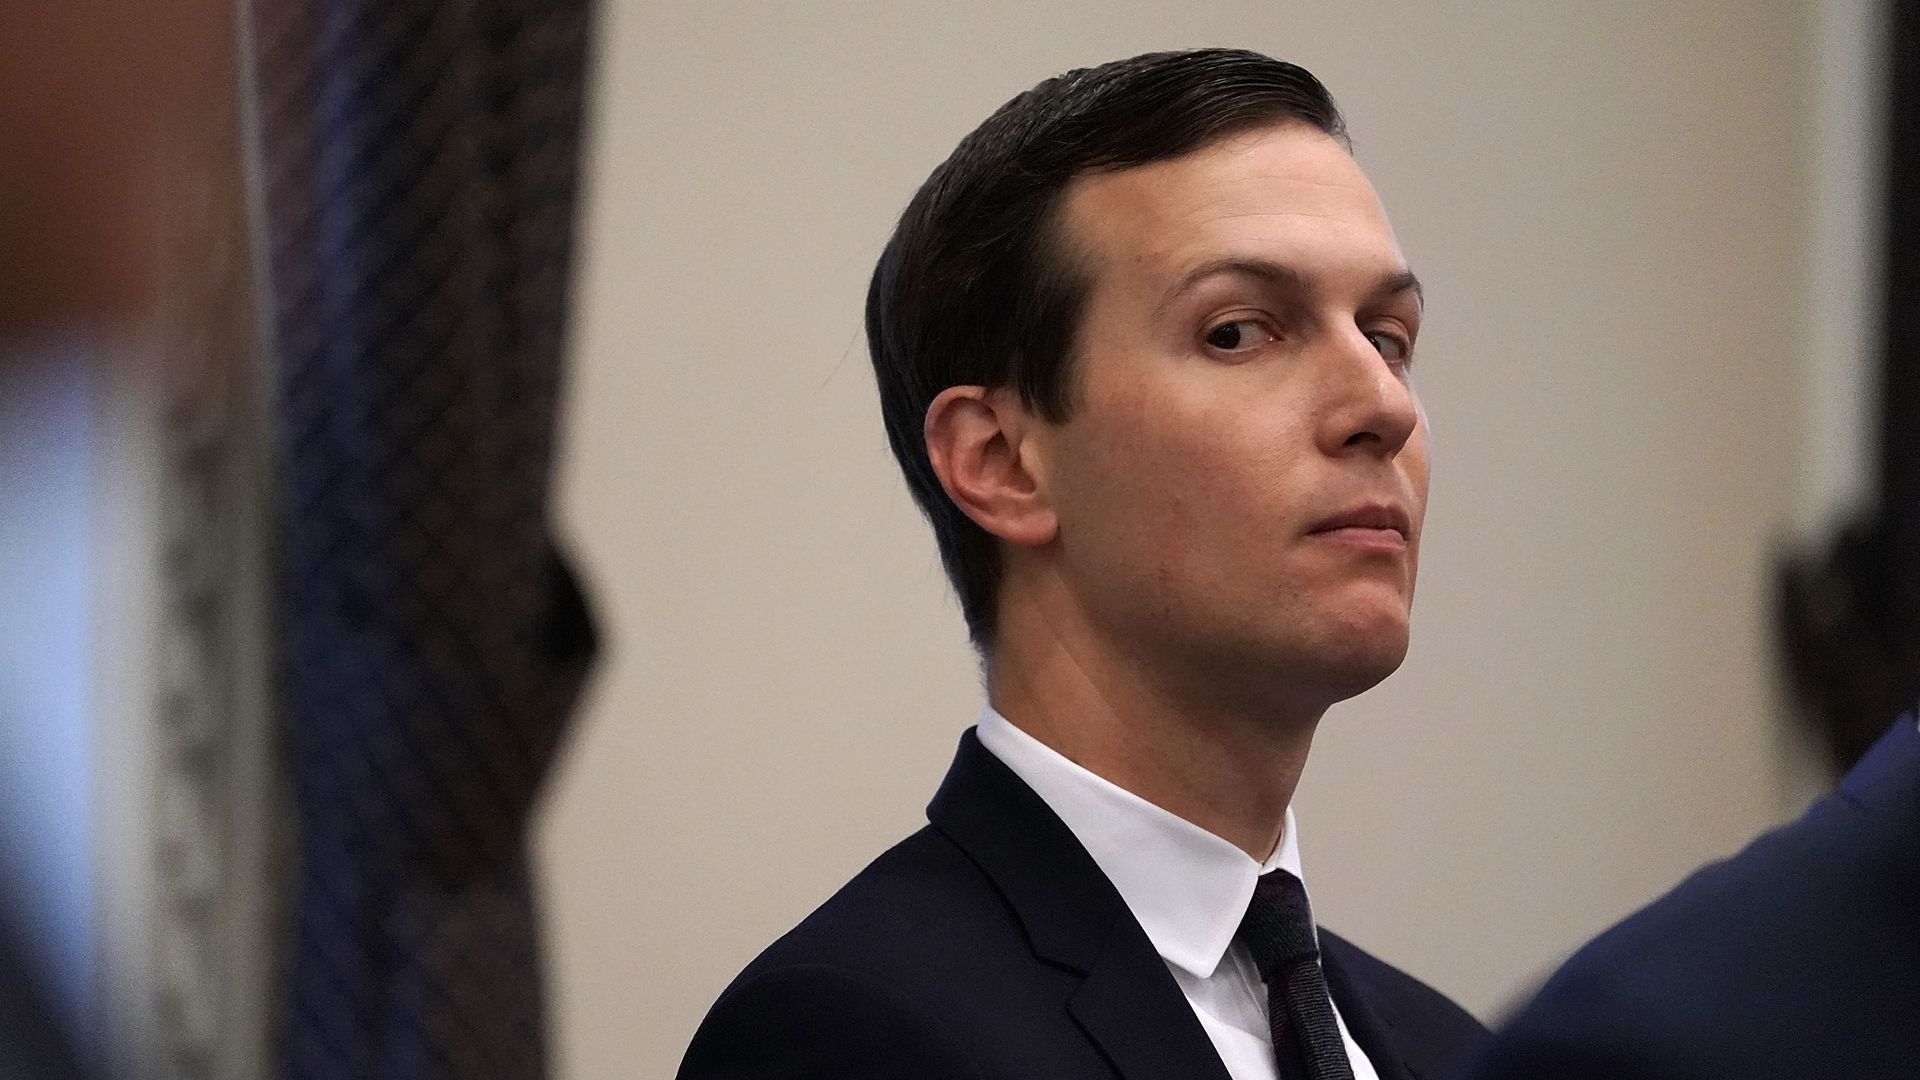 Jared Kushner looks out of the corner of his eye with his head tilted up